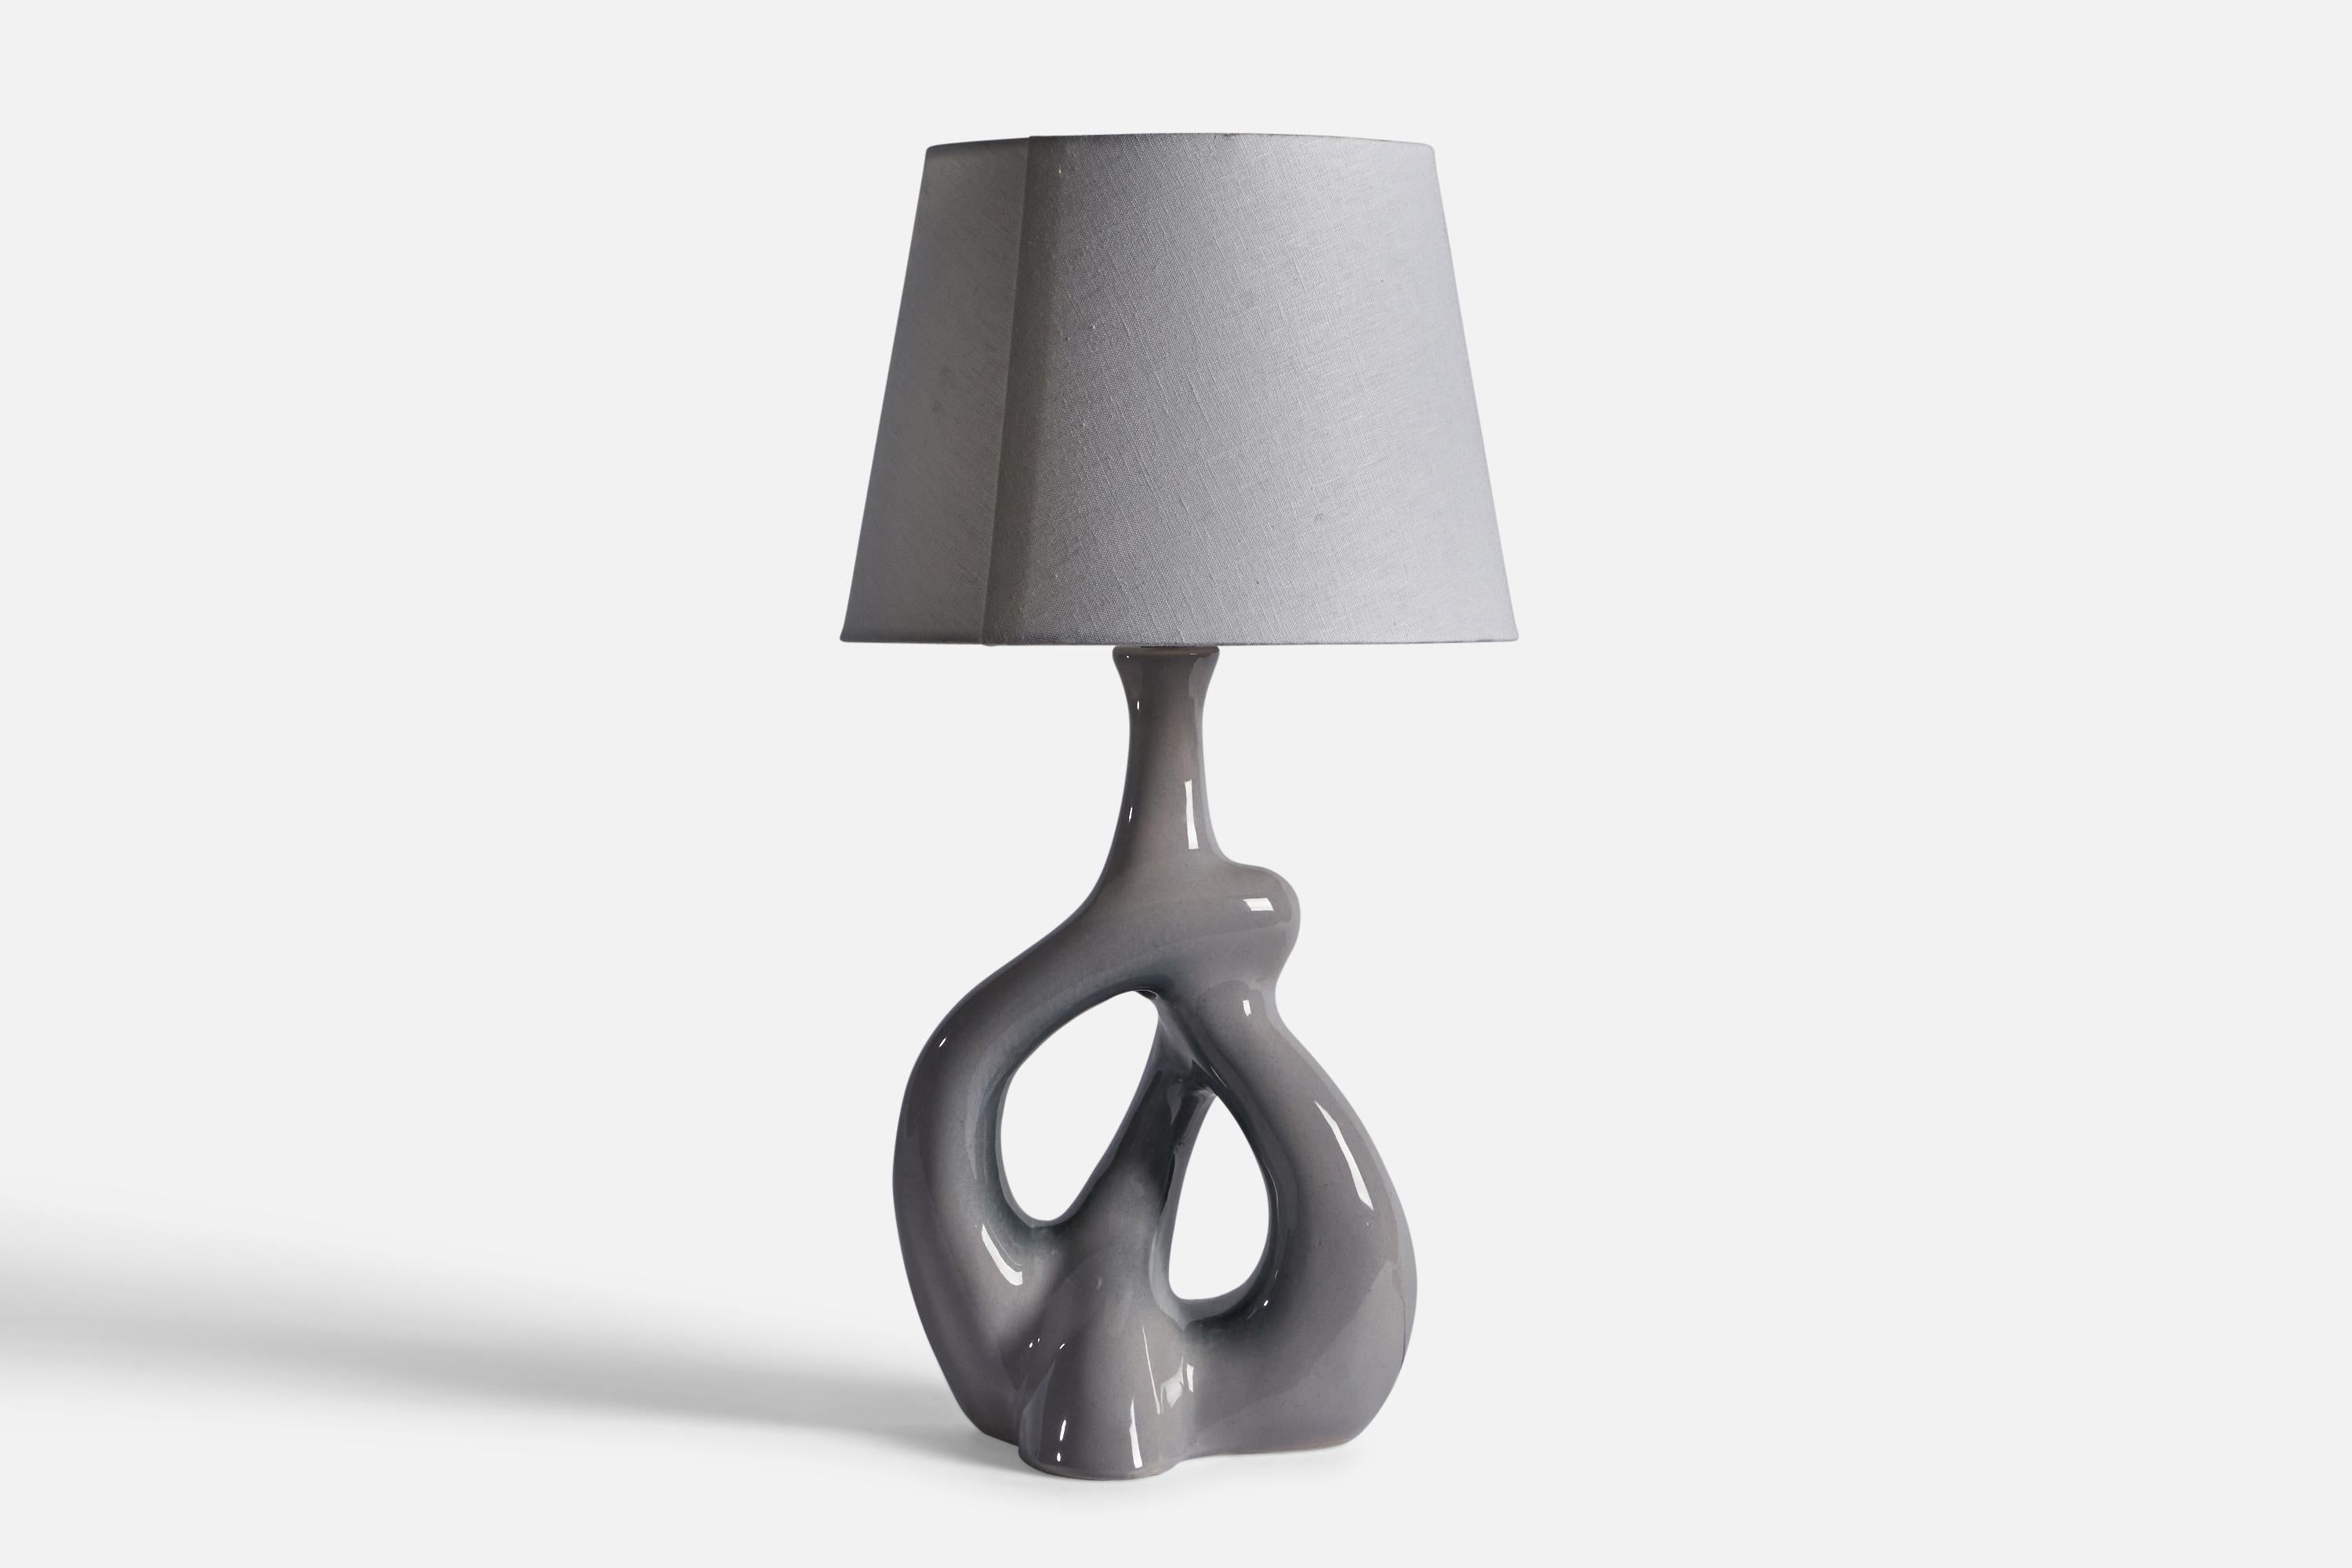 A grey-glazed ceramic freeform table lamp, designed and produced in the US, c. 1950s.

Dimensions of Lamp (inches): 23.5